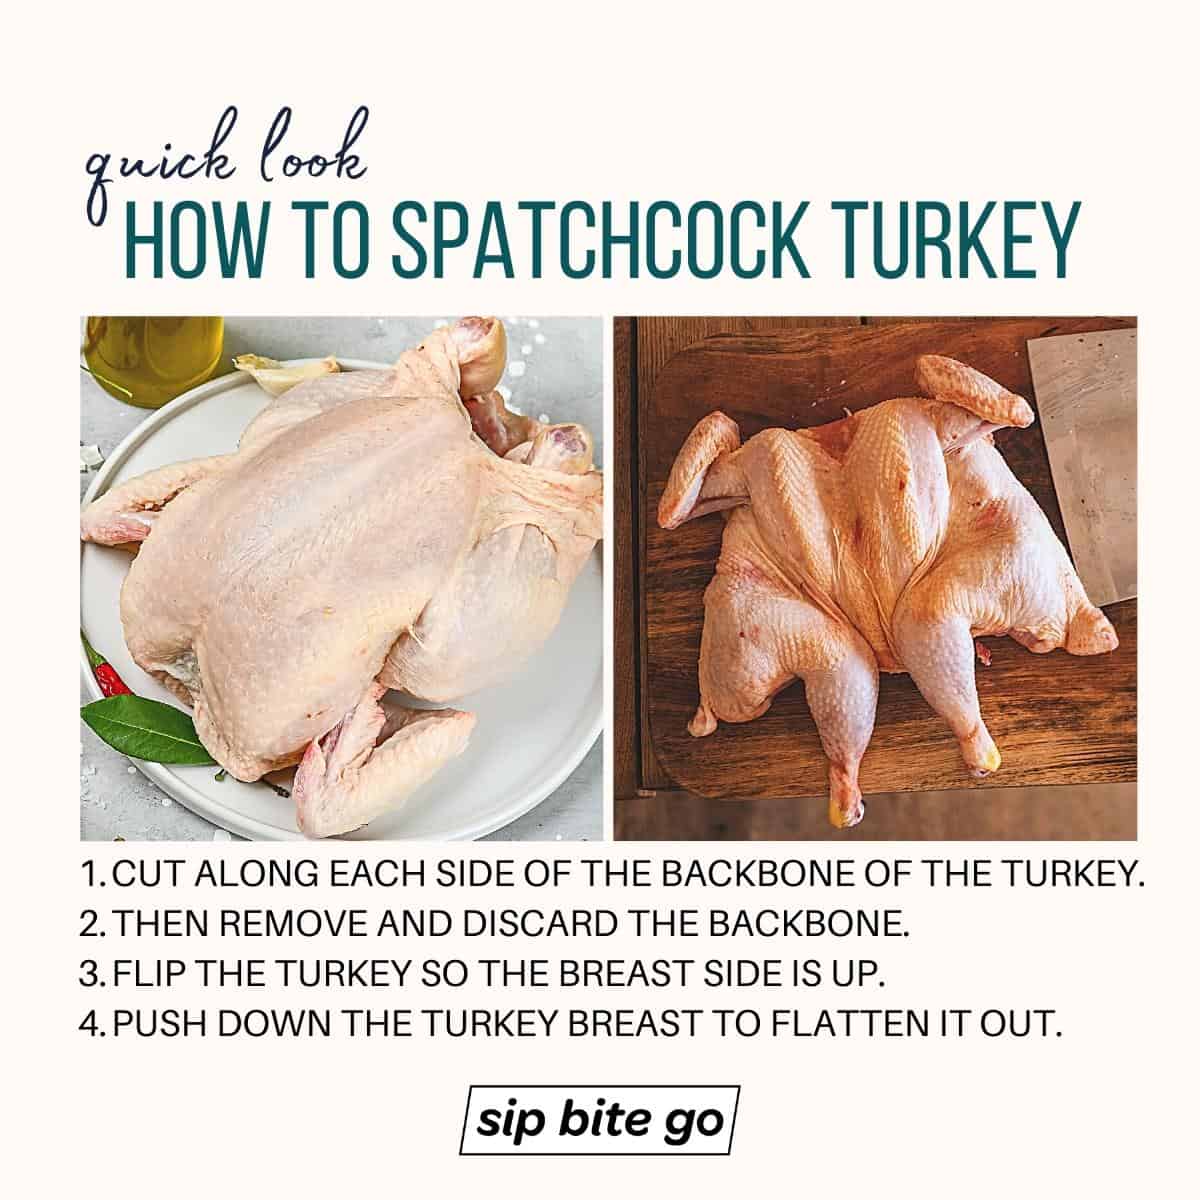 Infographic demonstrating steps to spatchcock turkey for smoking on pellet grills